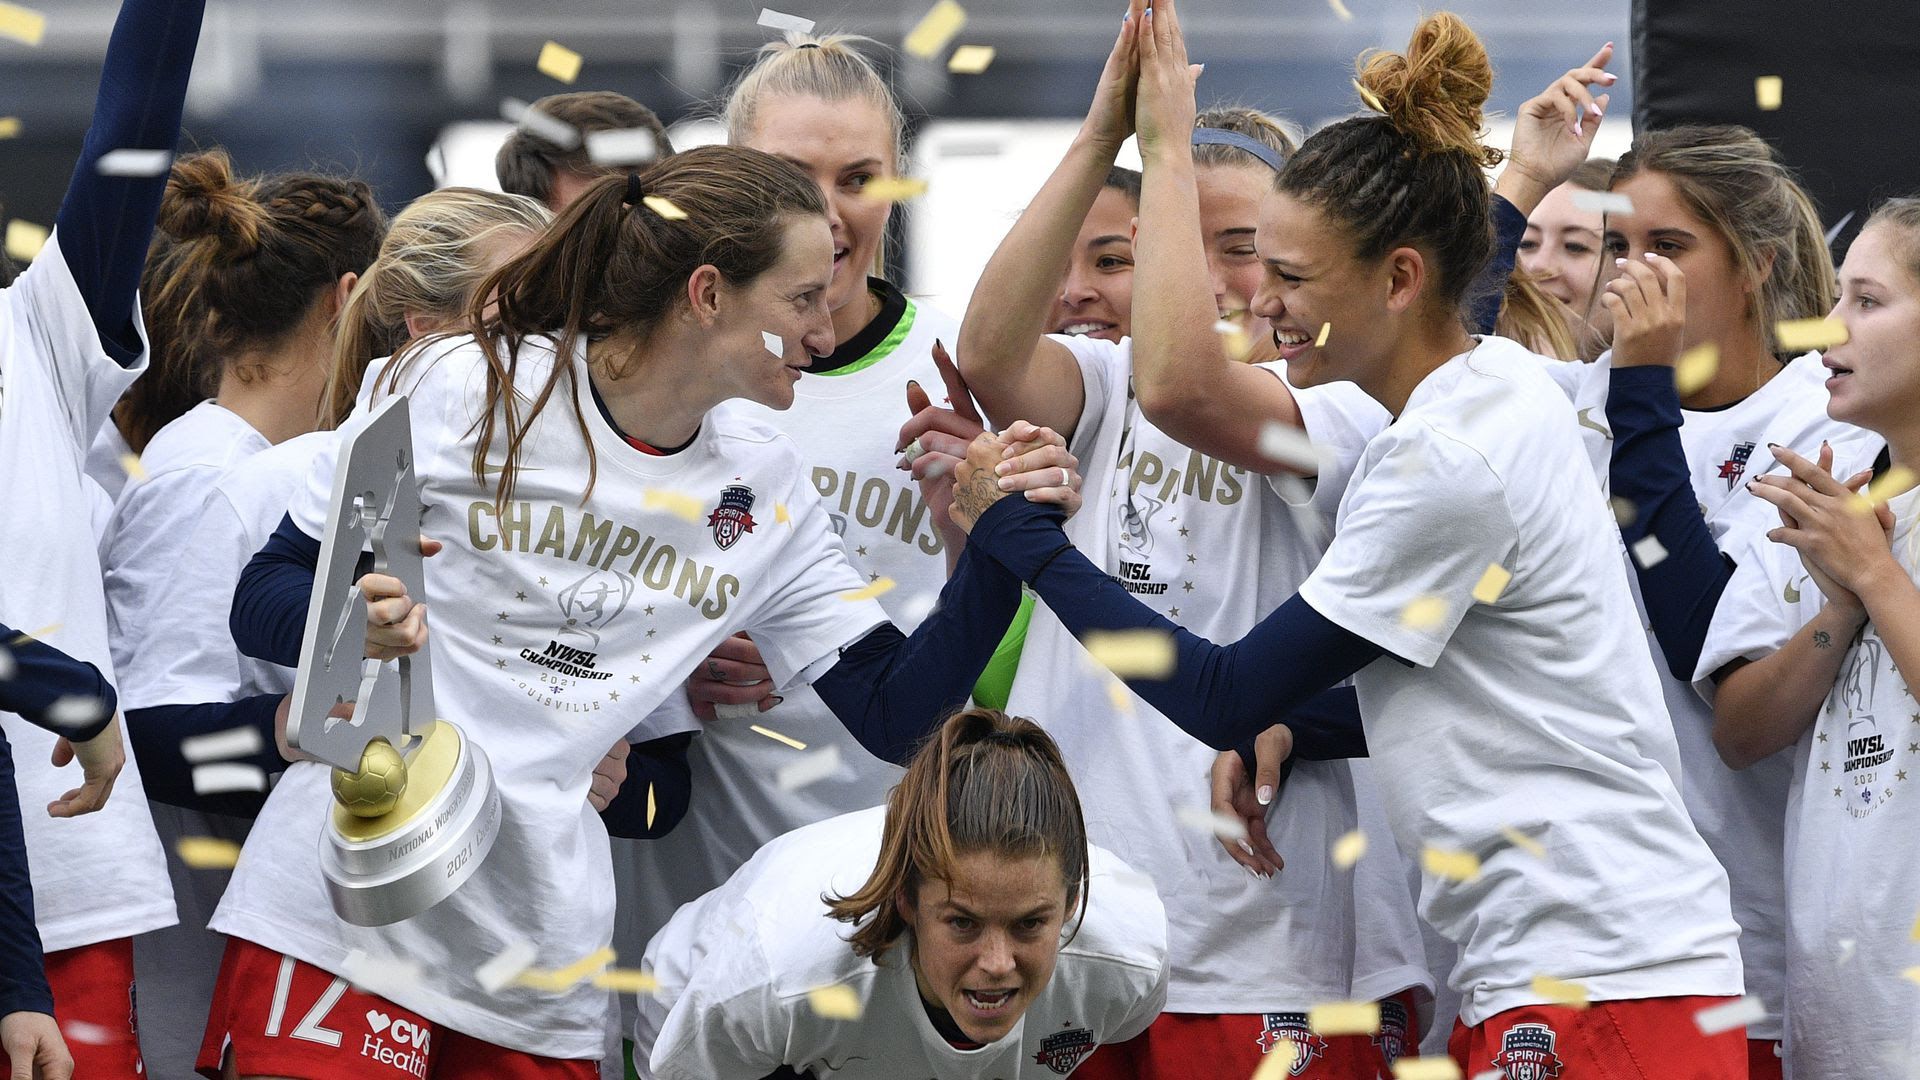 The Washington Spirit soccer team celebrates a victory at the NWSL Championship match.